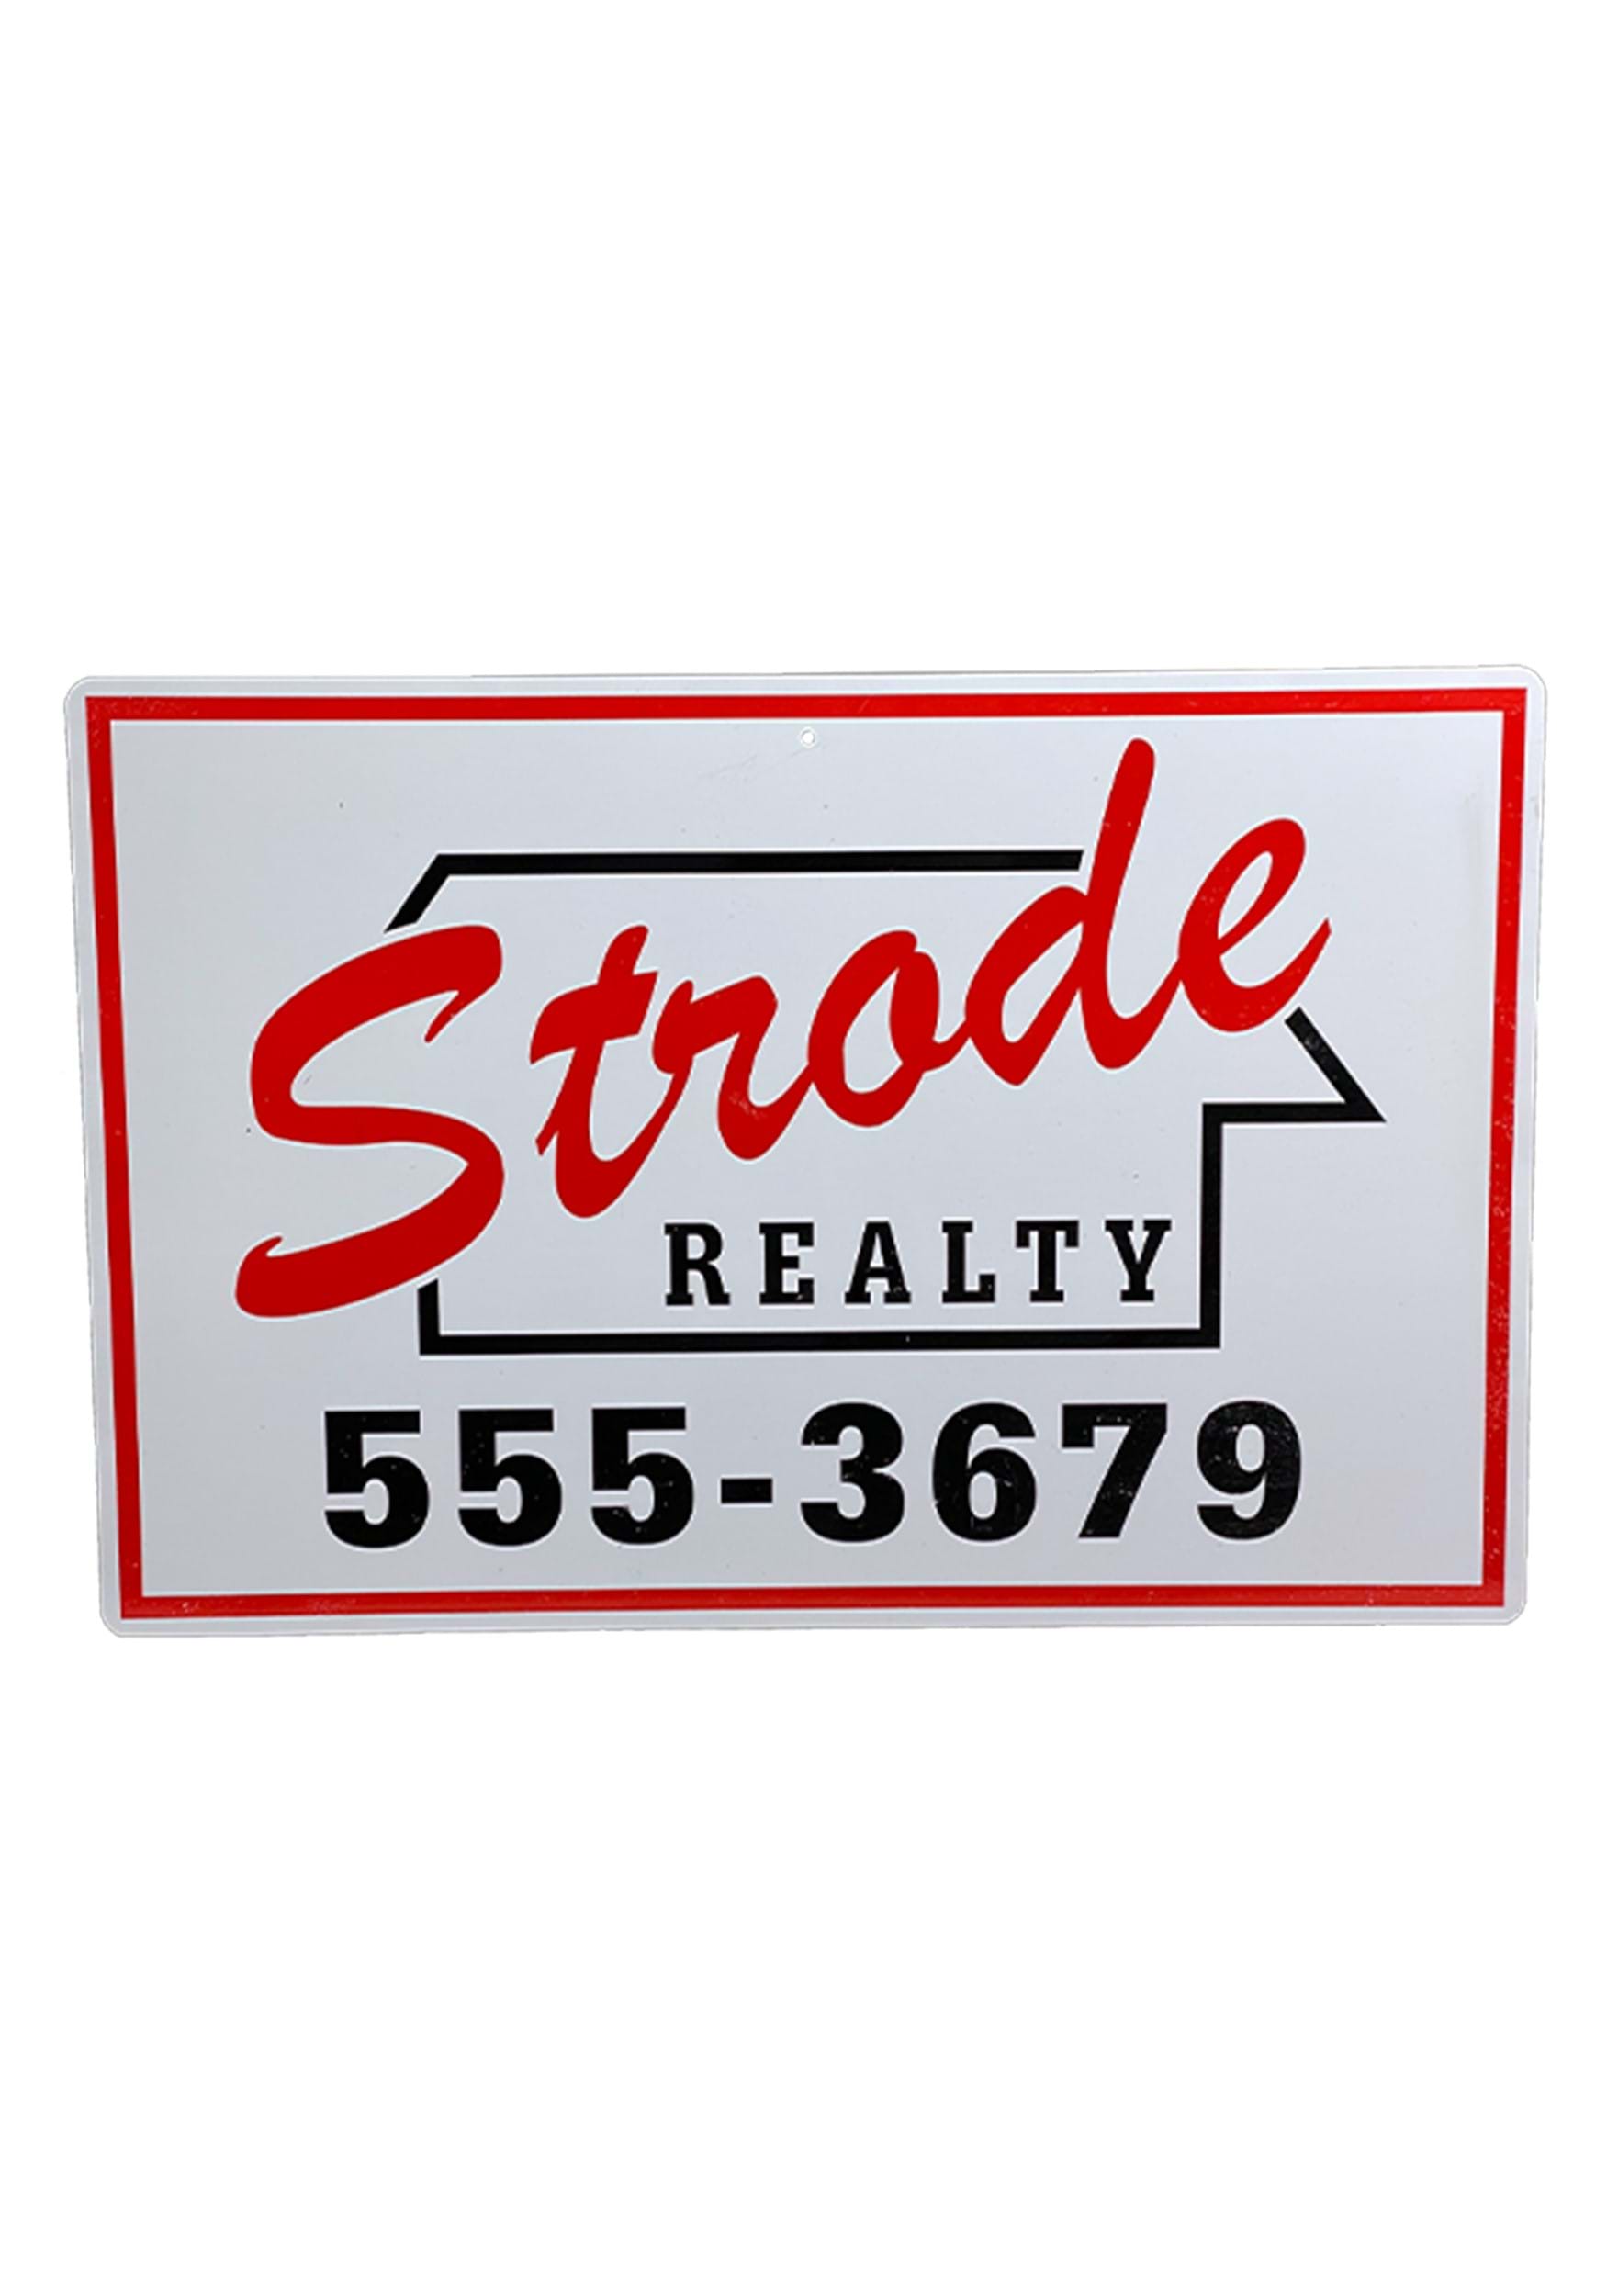 Halloween Strode Realty Metal Sign Decoration Multicolor Colombia